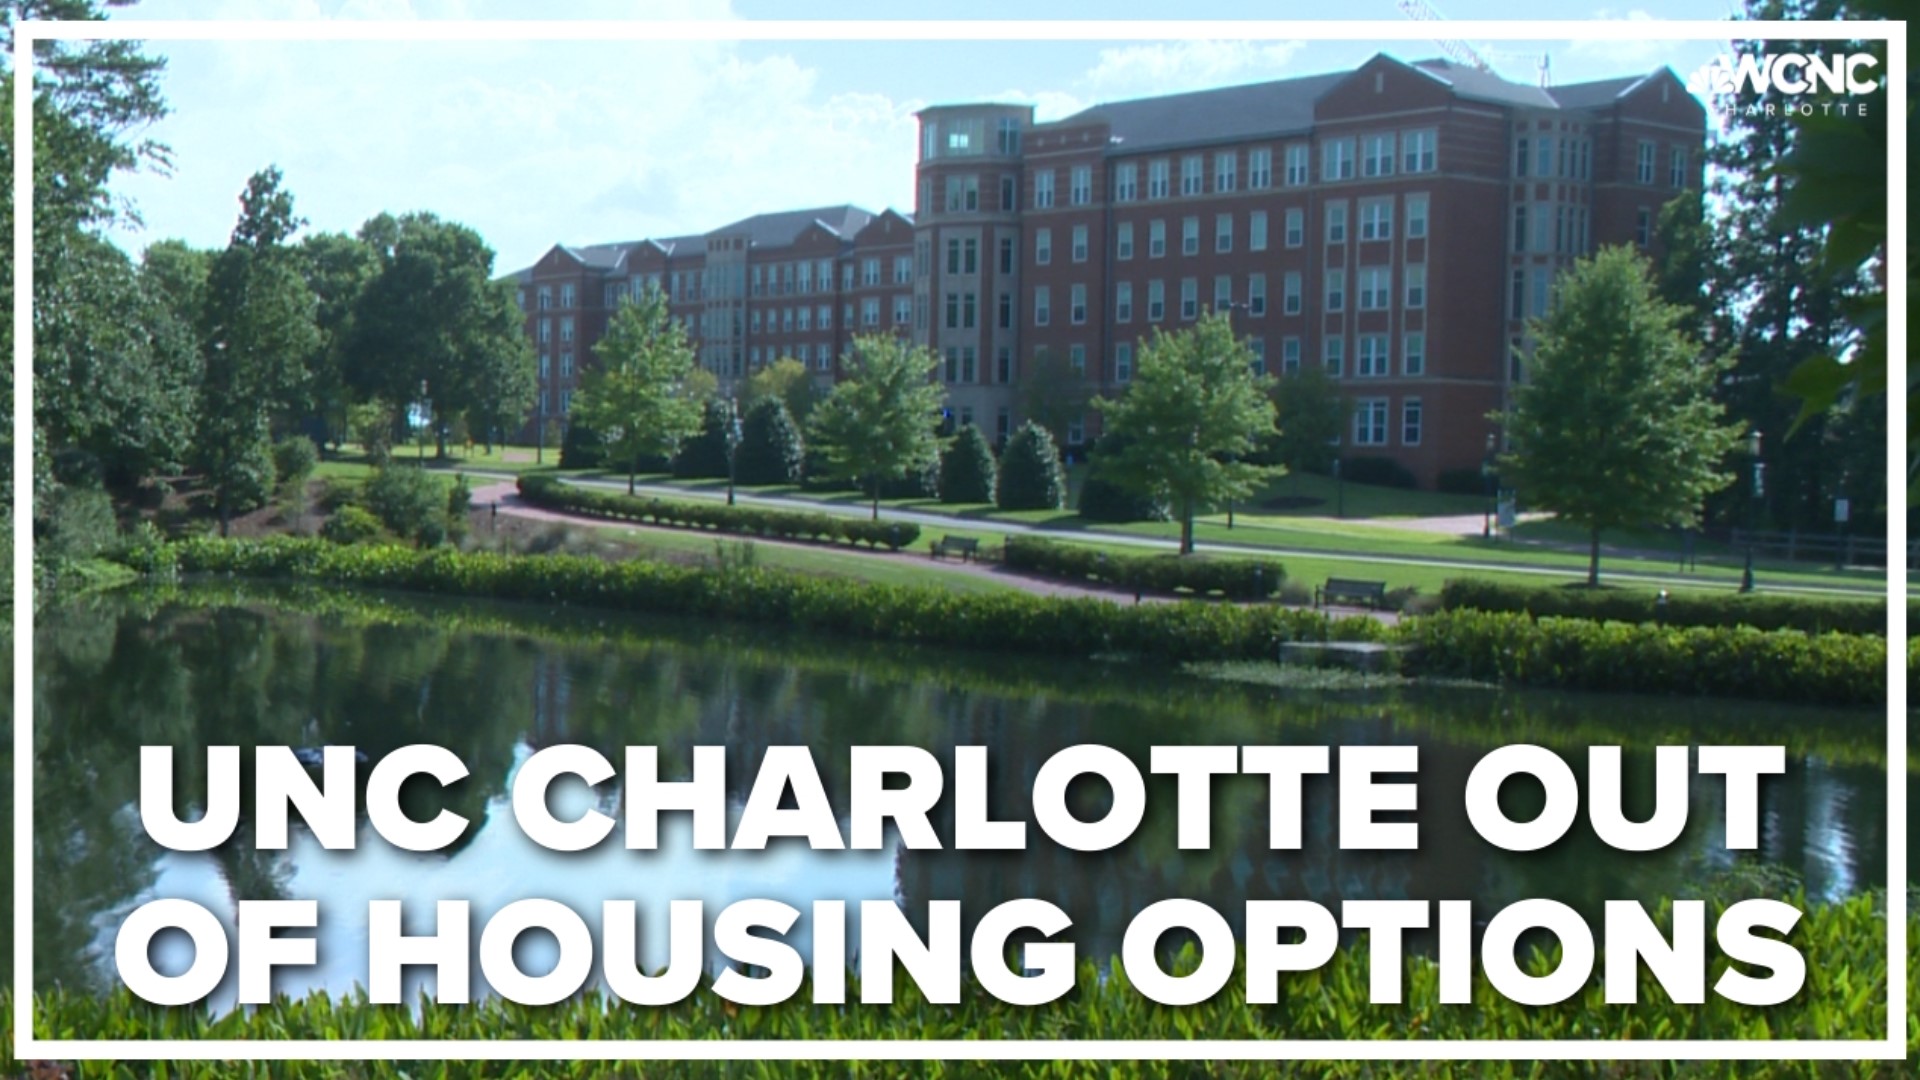 WCNC Charlotte obtained emails from the university to students saying the school is out of housing options for them.